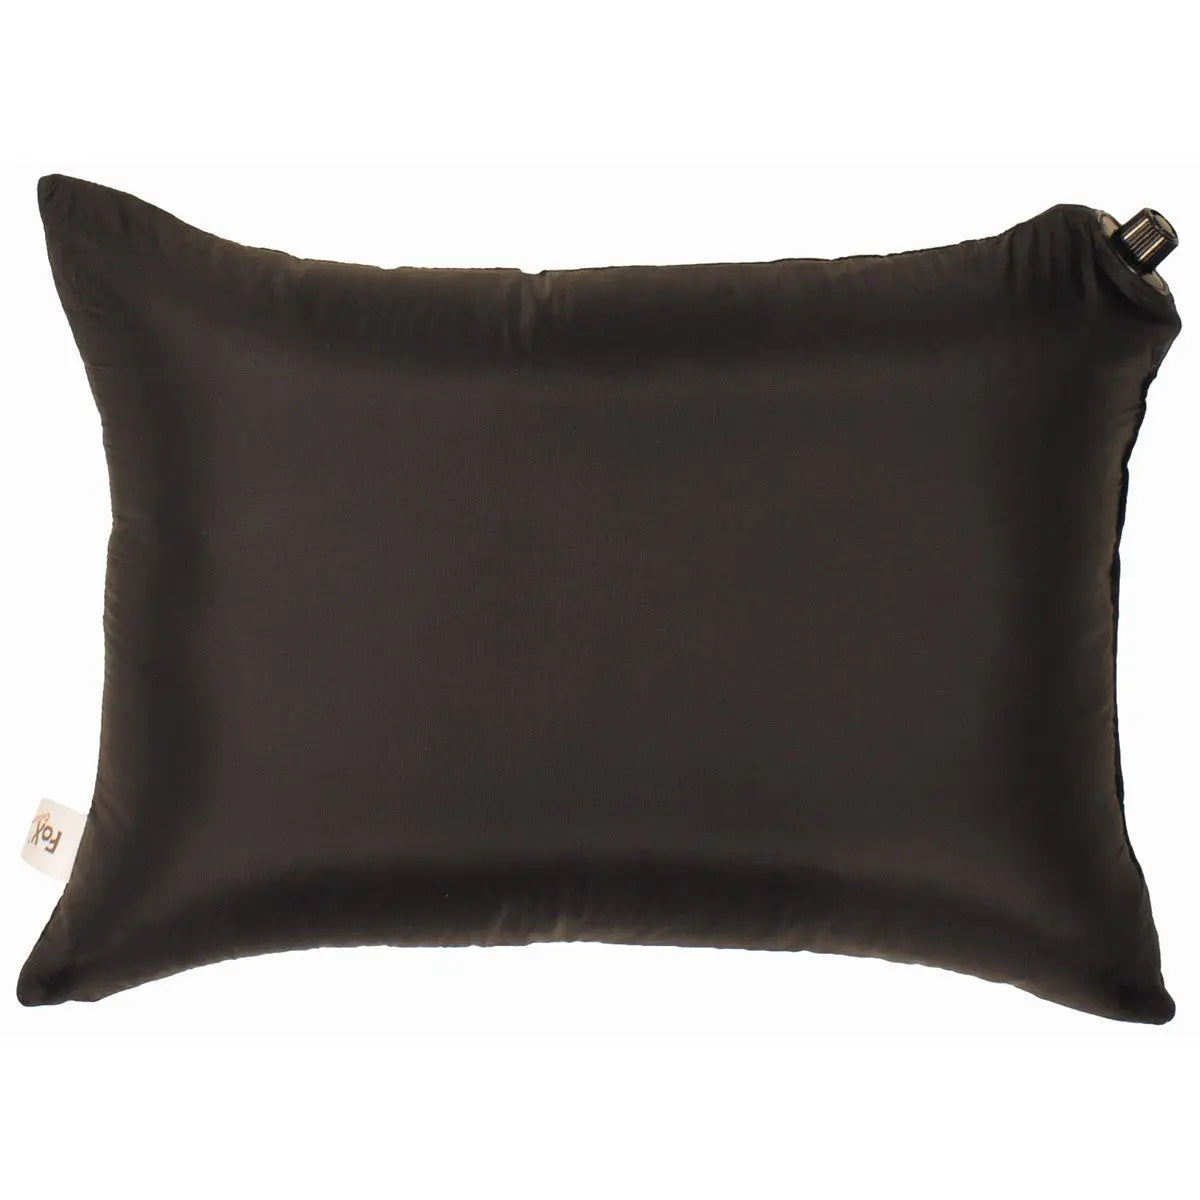 Travel Pillow, inflatable, black